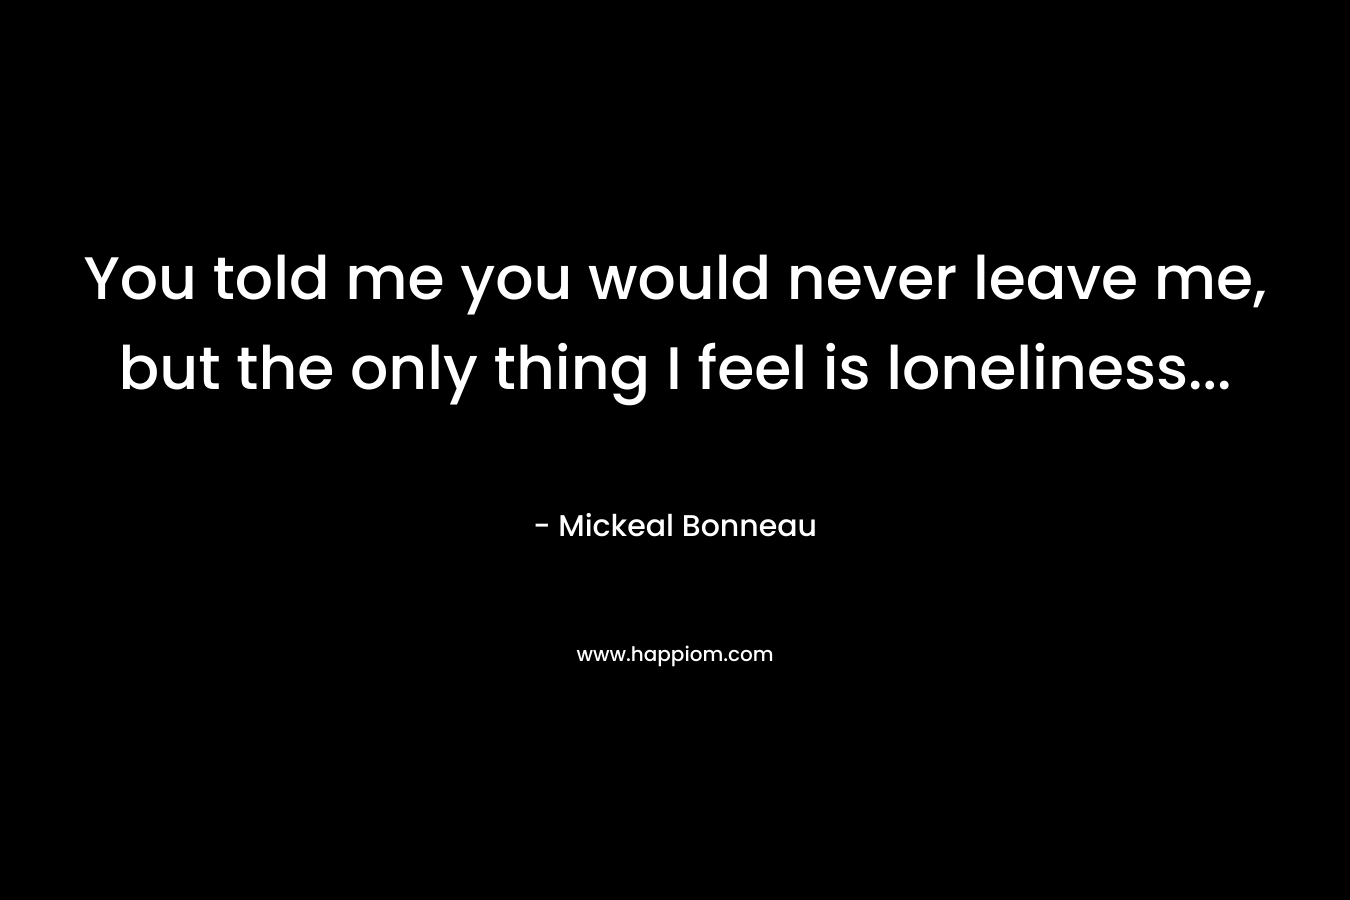 You told me you would never leave me, but the only thing I feel is loneliness...